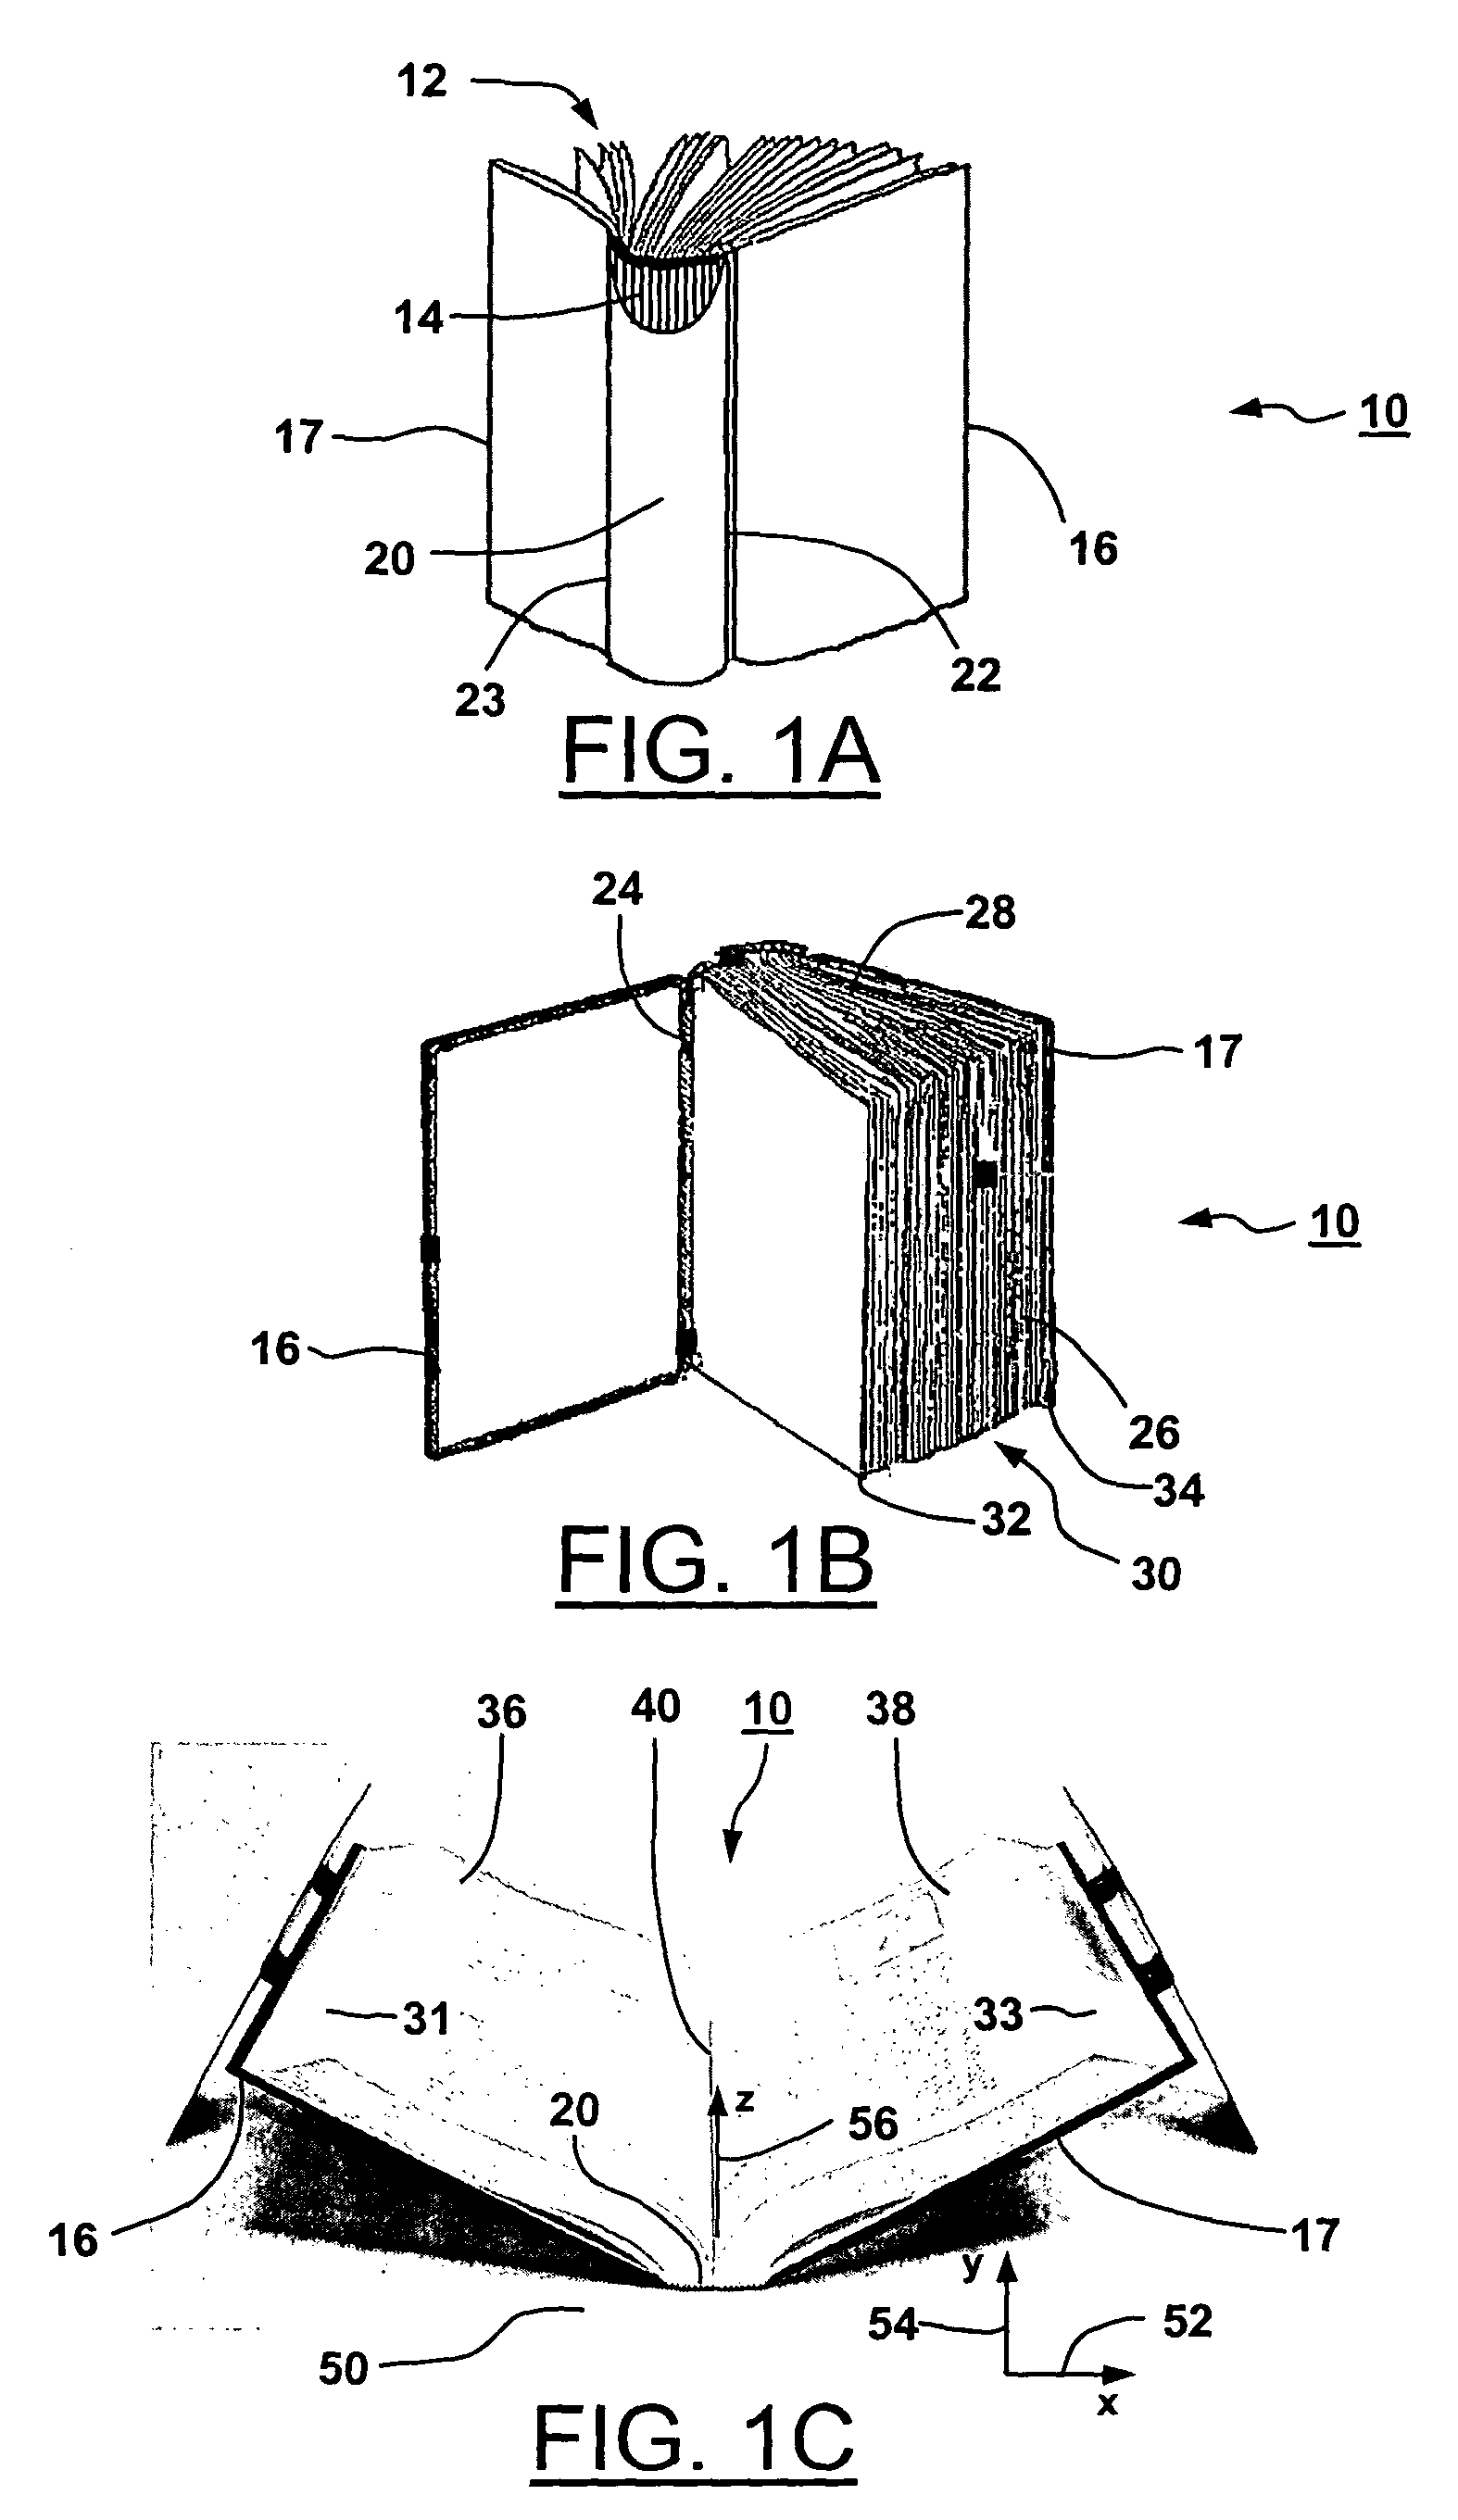 Automated page turning apparatus to assist in viewing pages of a document